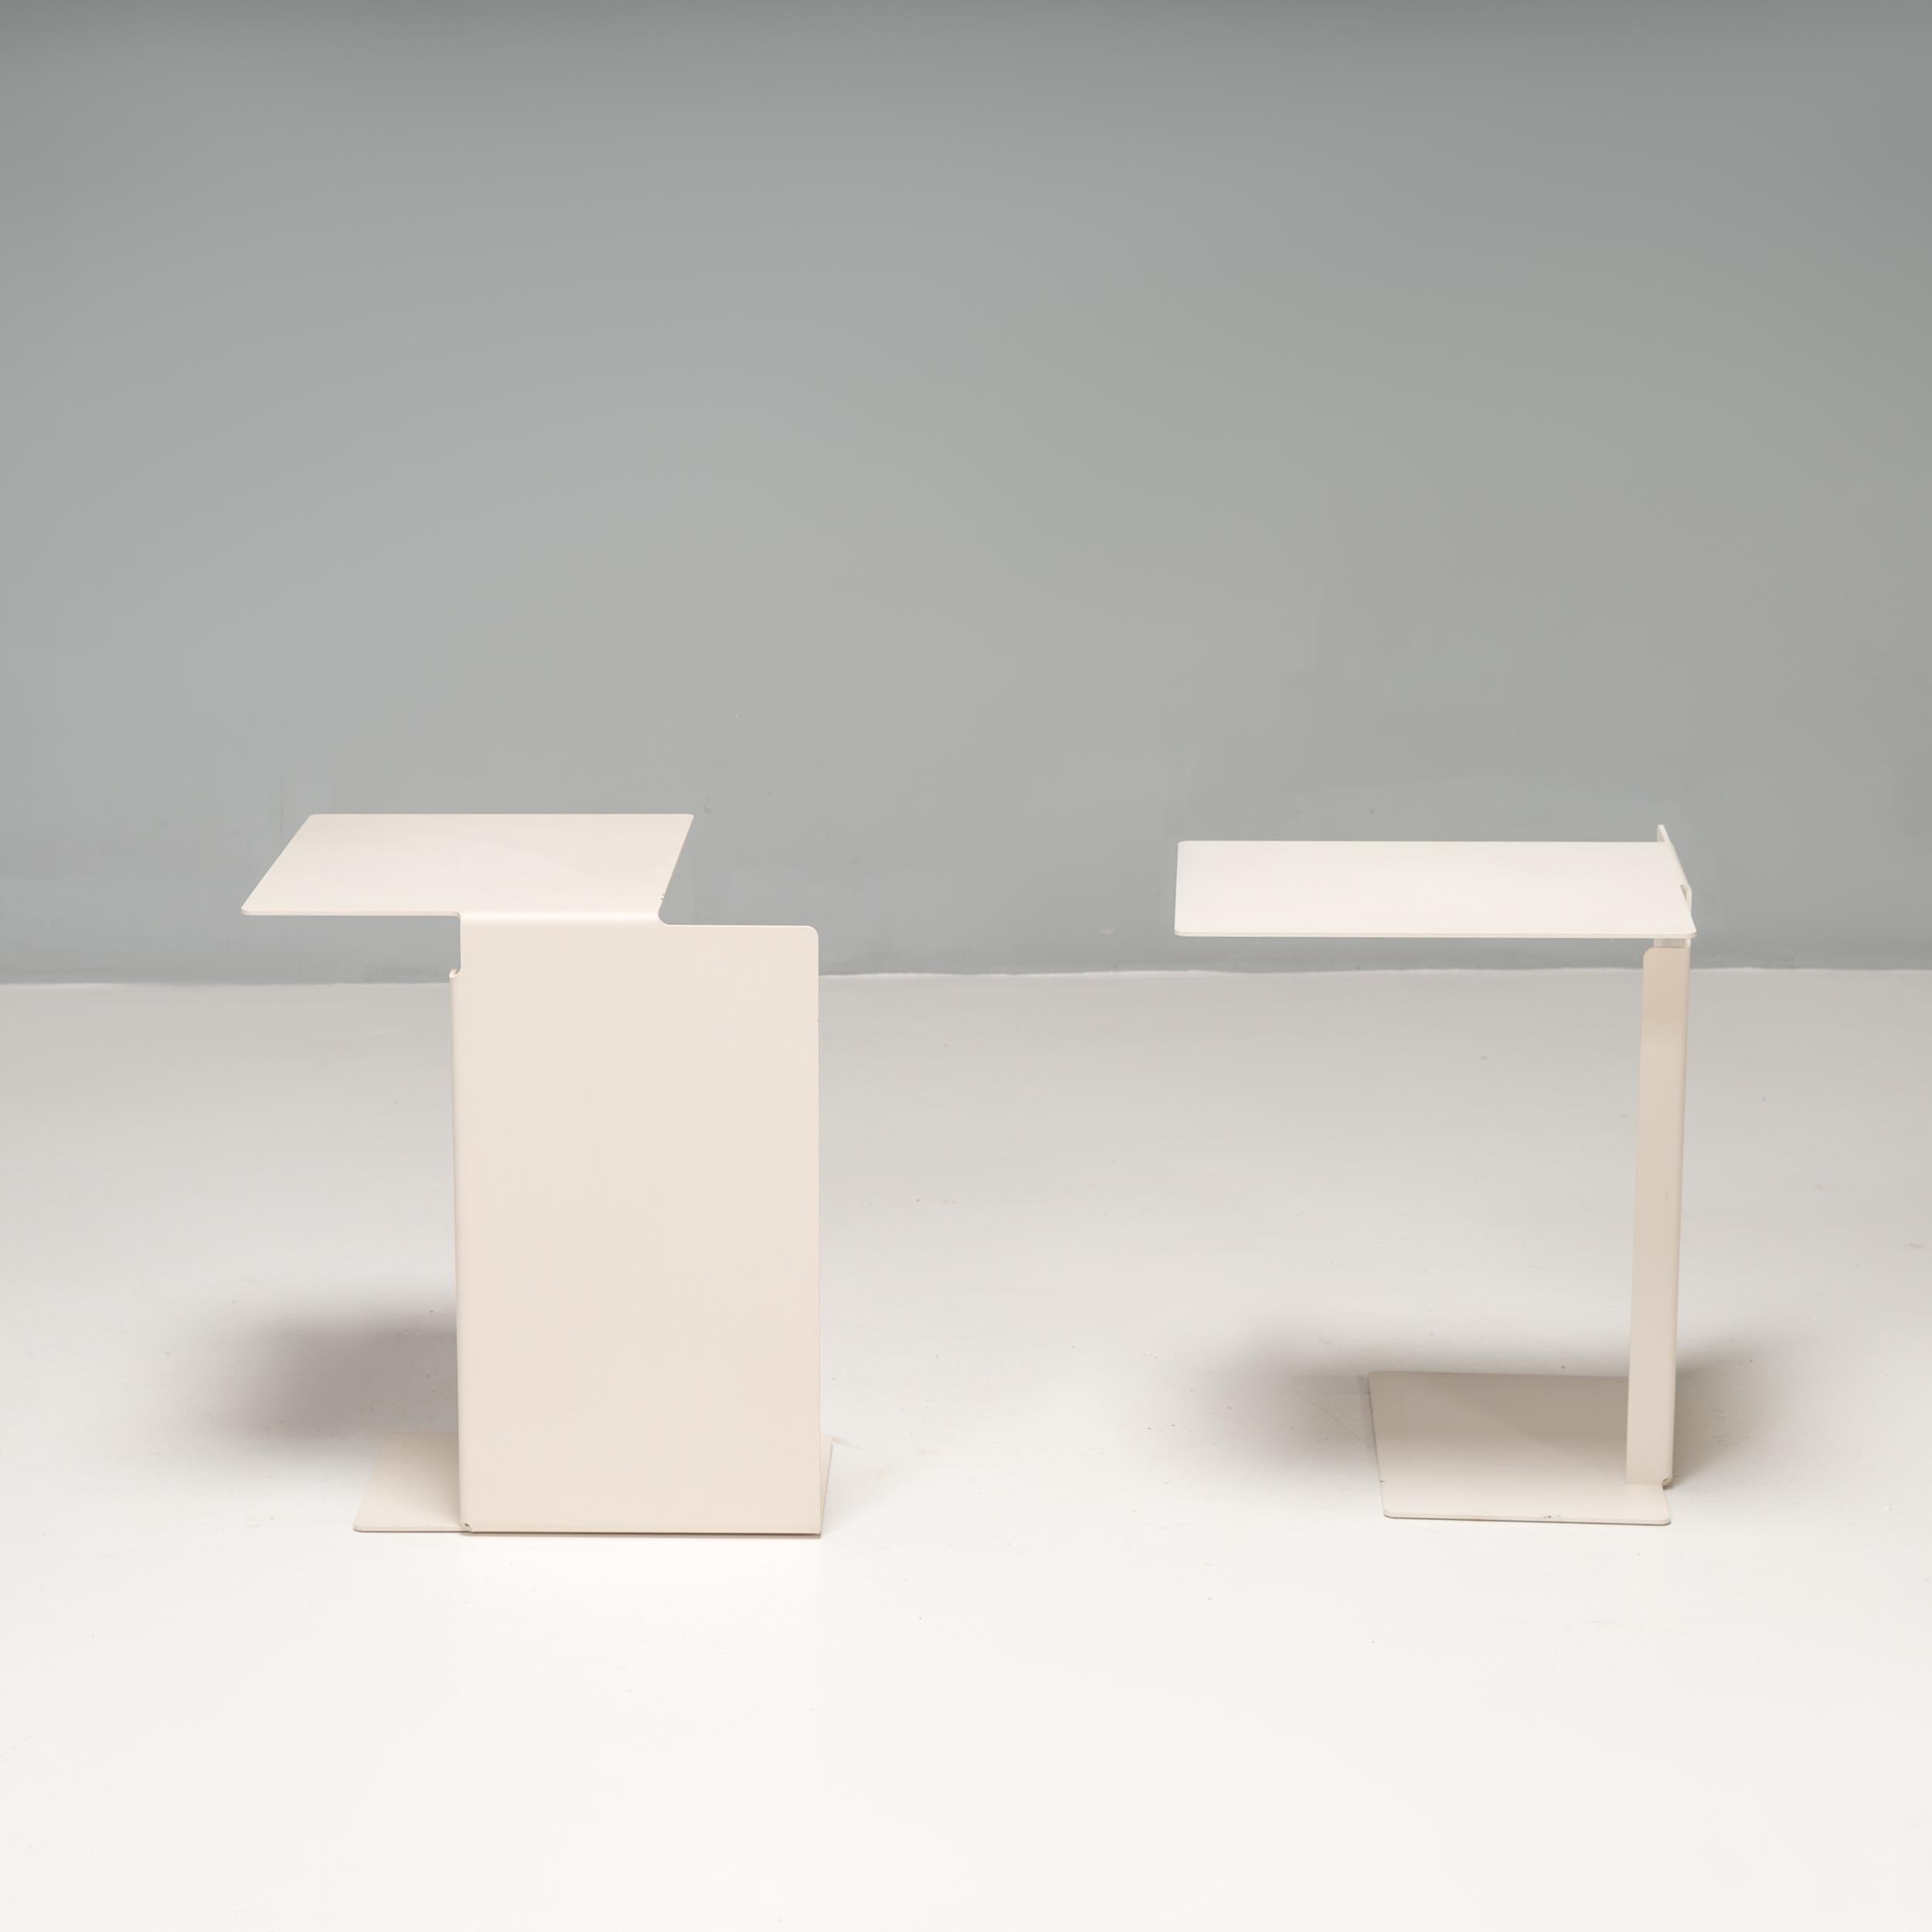 German Konstantin Grcic for Classicon Diana B White Side Tables, Set of 2 For Sale